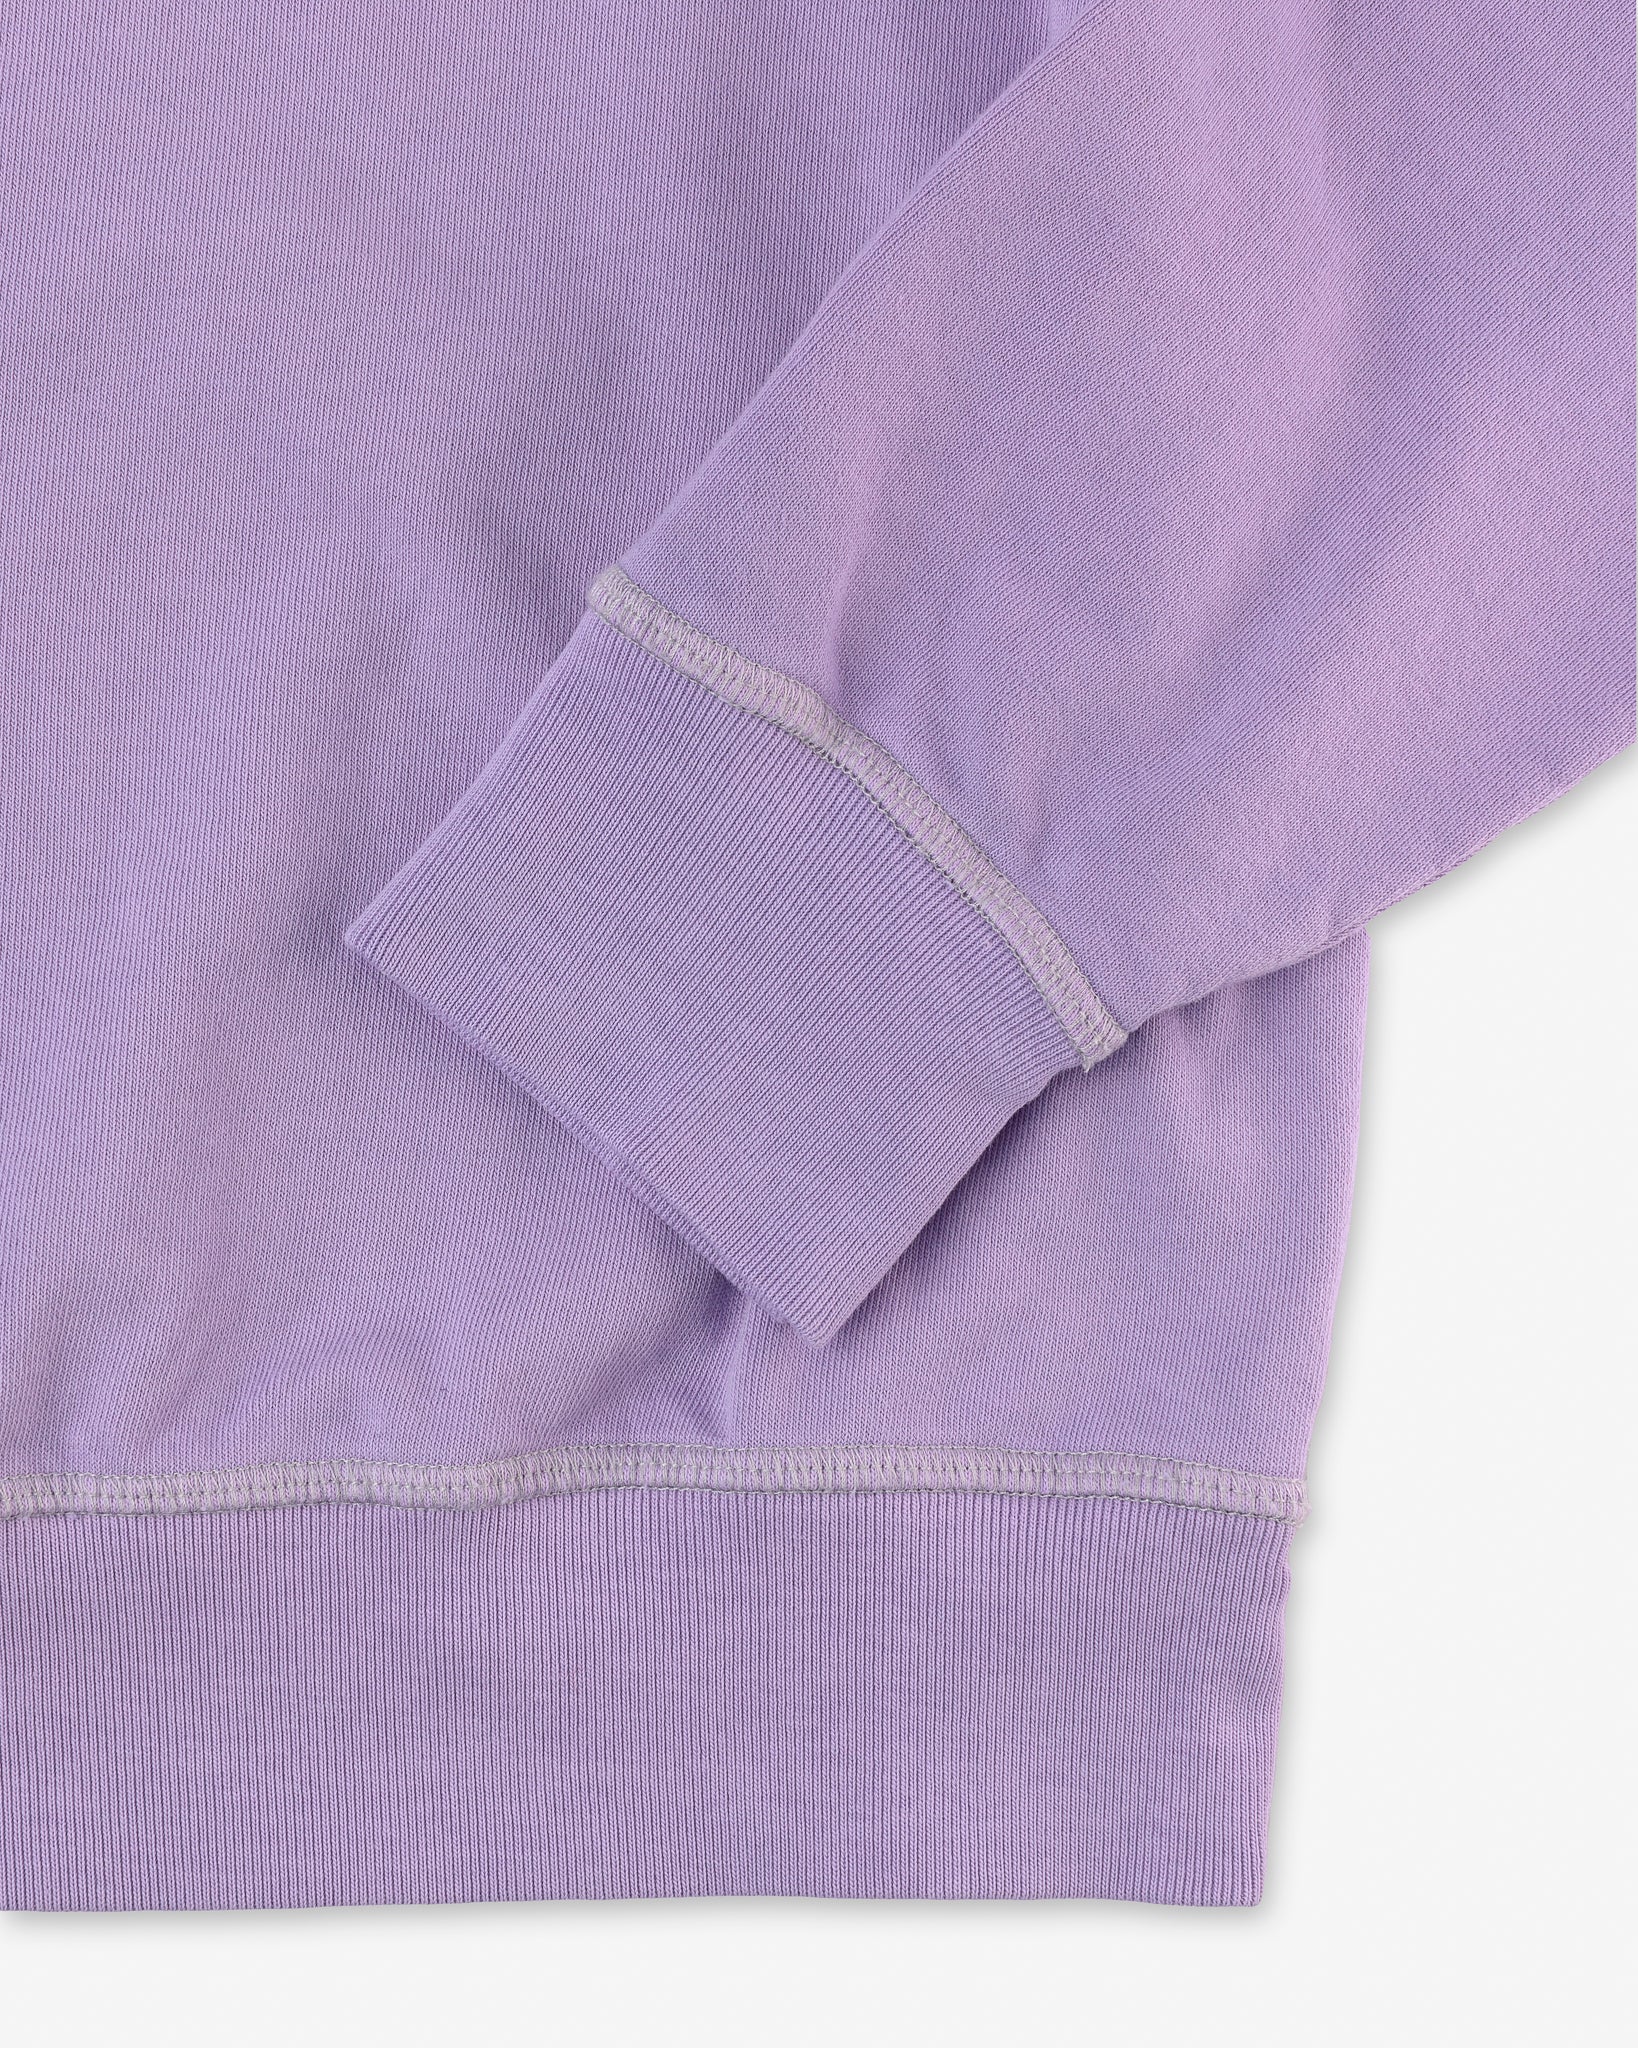 close up of hem and cuff on front of men's digital lavender purple long sleeve sweatshirt made with organic cotton